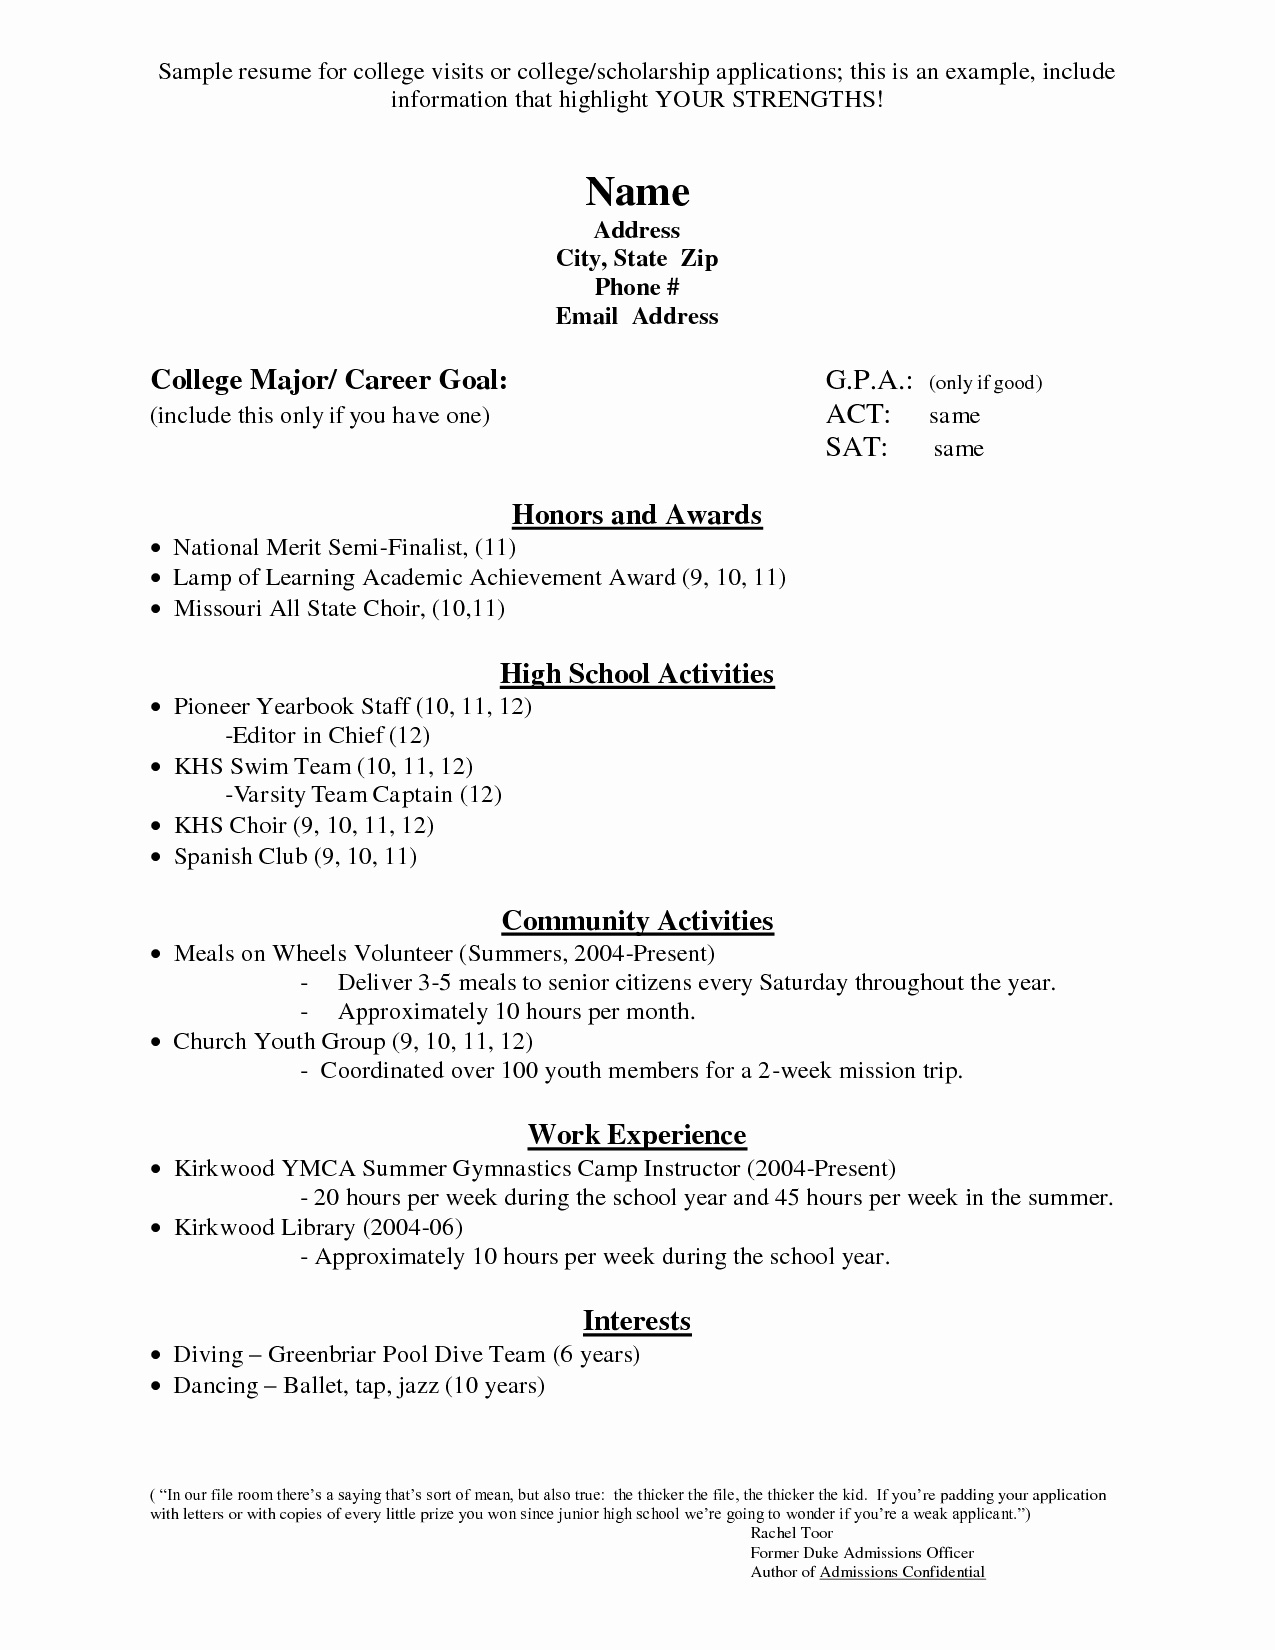 Resume Tips Templates 008 Template Ideas High School Senior Resume Examples For College